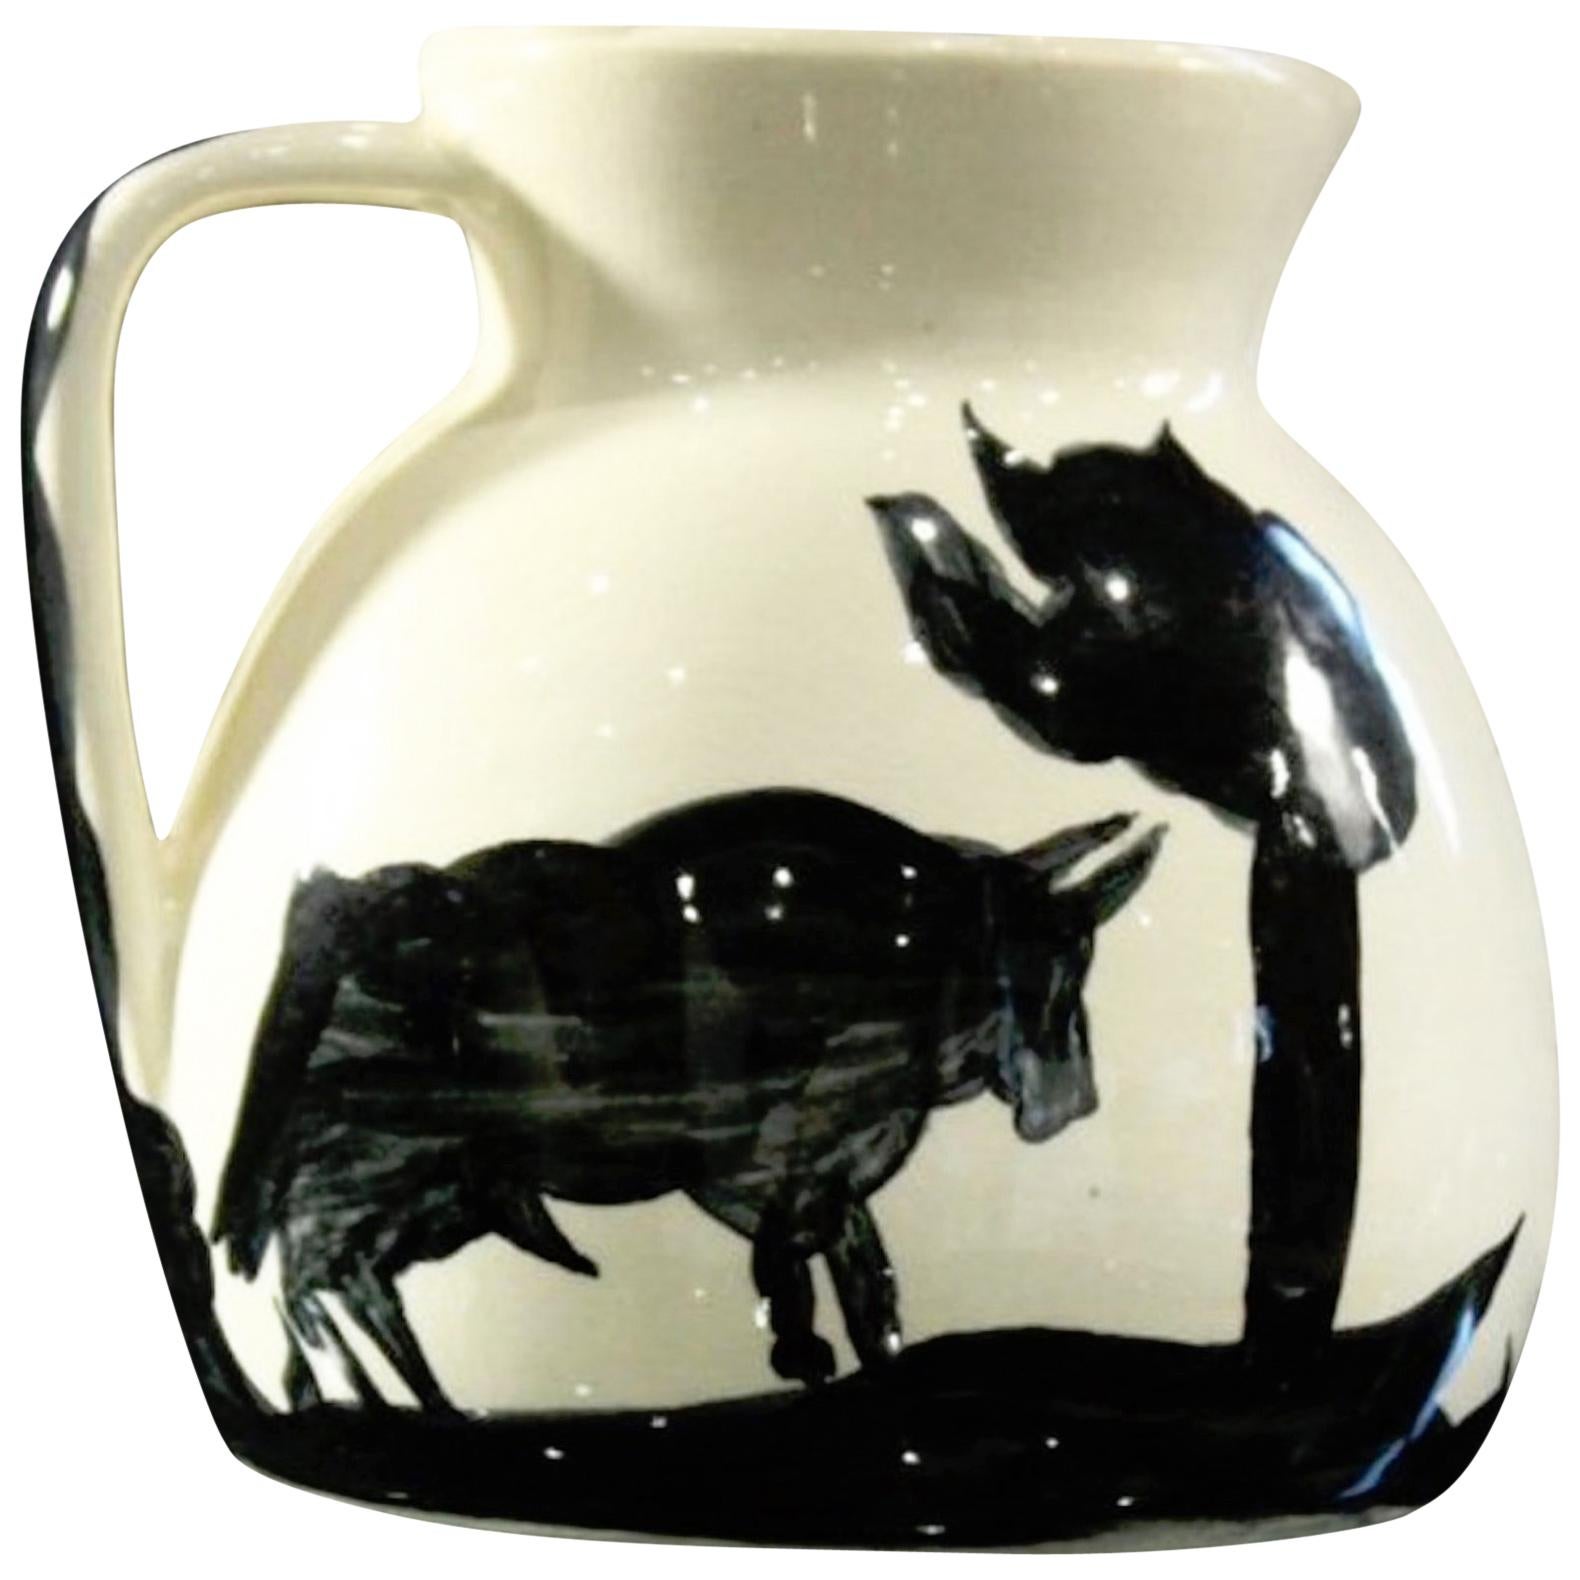 Stamped Edition Padilla Picasso Pottery Pitcher, Taureau et Picador (A. R. 369)